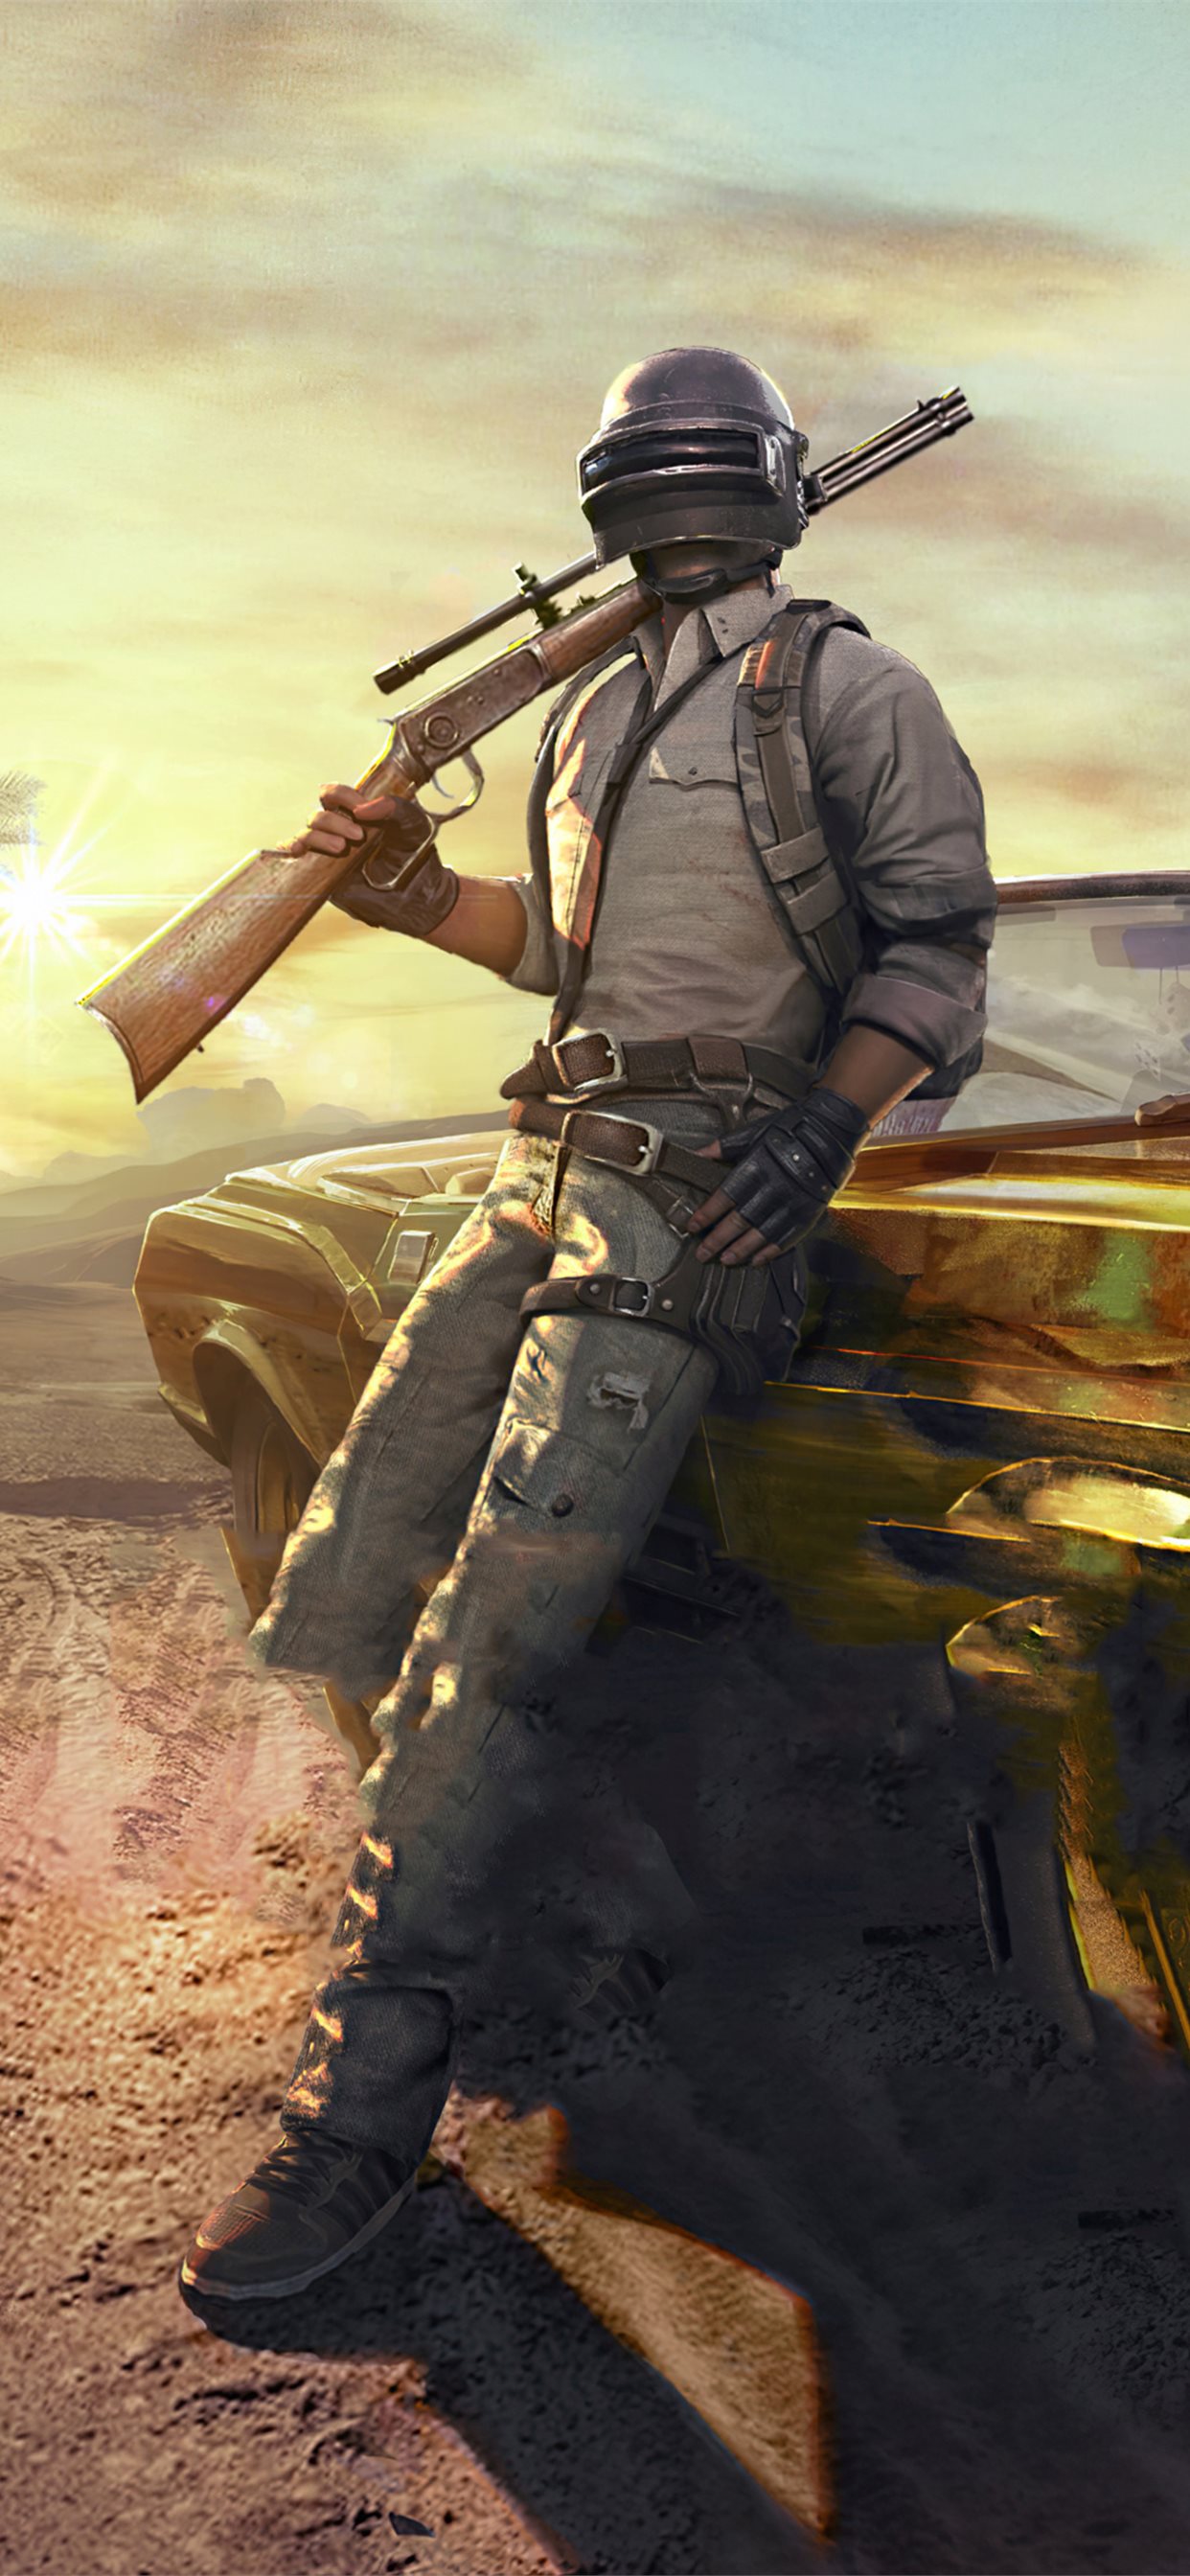 pubg 4k 2020game iPhone X Wallpapers Free Download